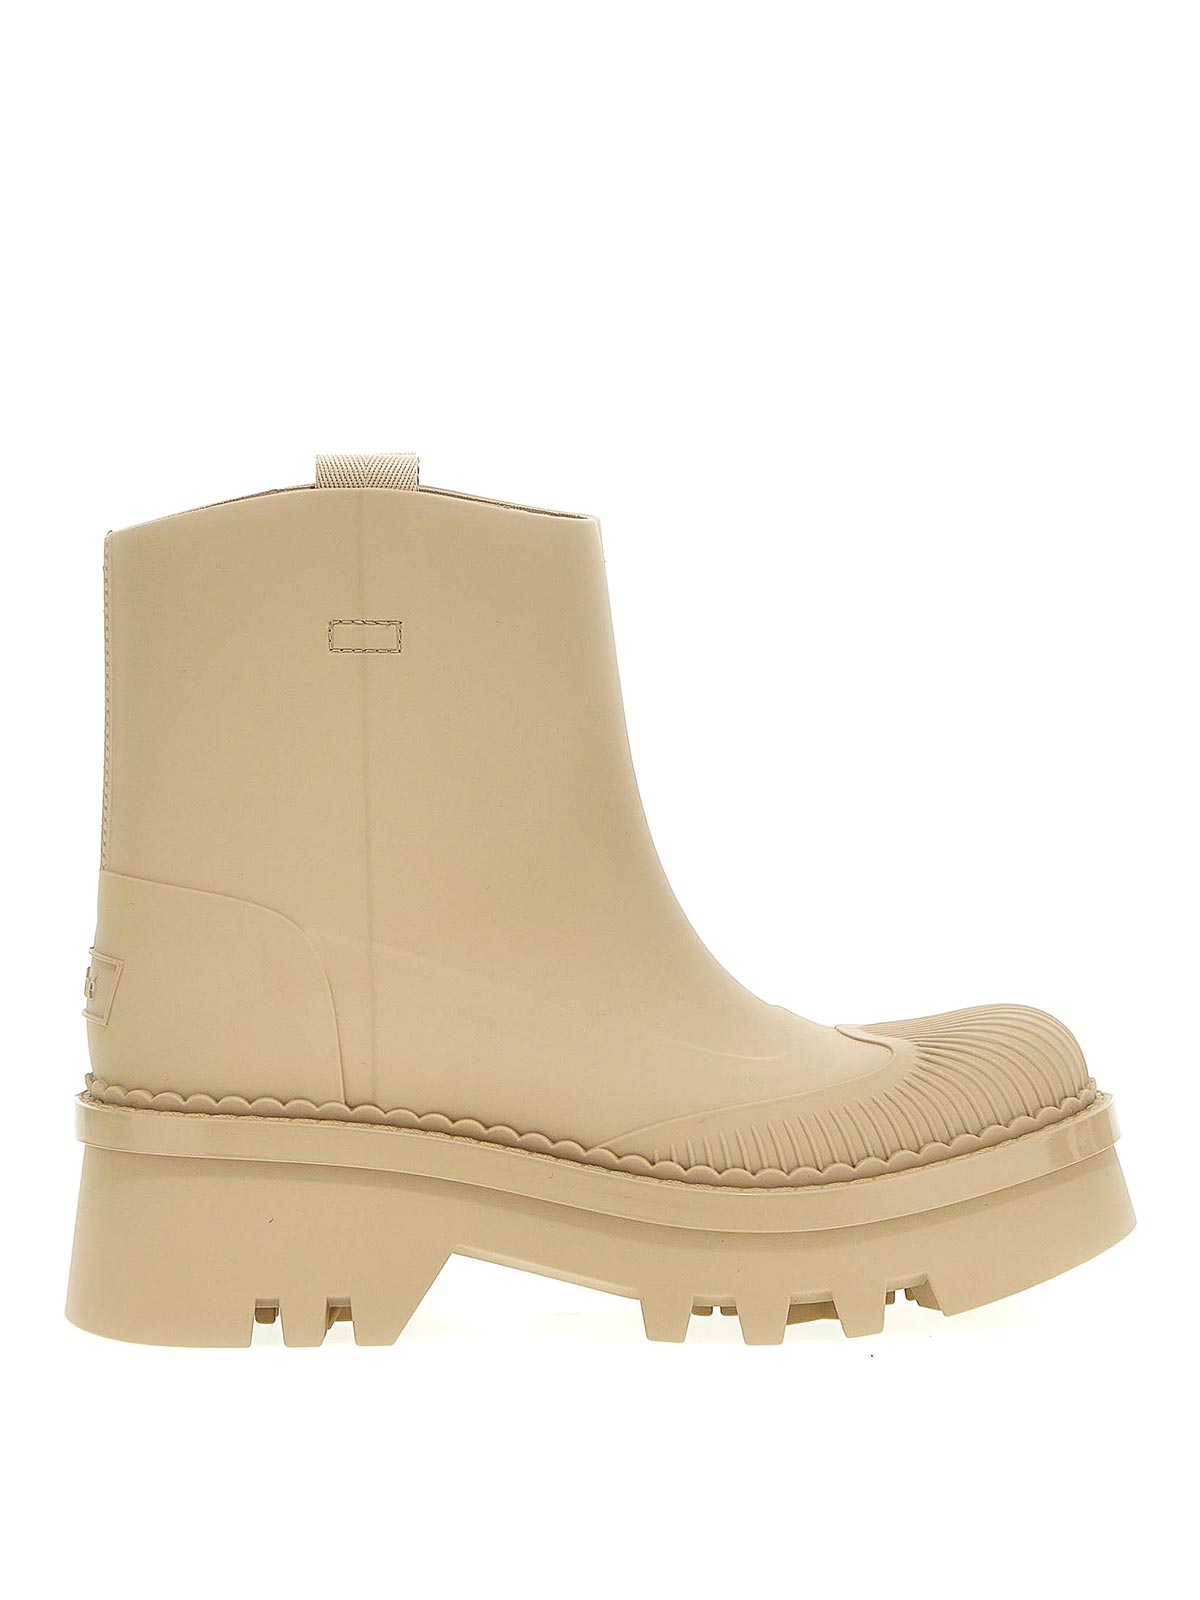 Shop Chloé Raina Ankle Boots In Beige